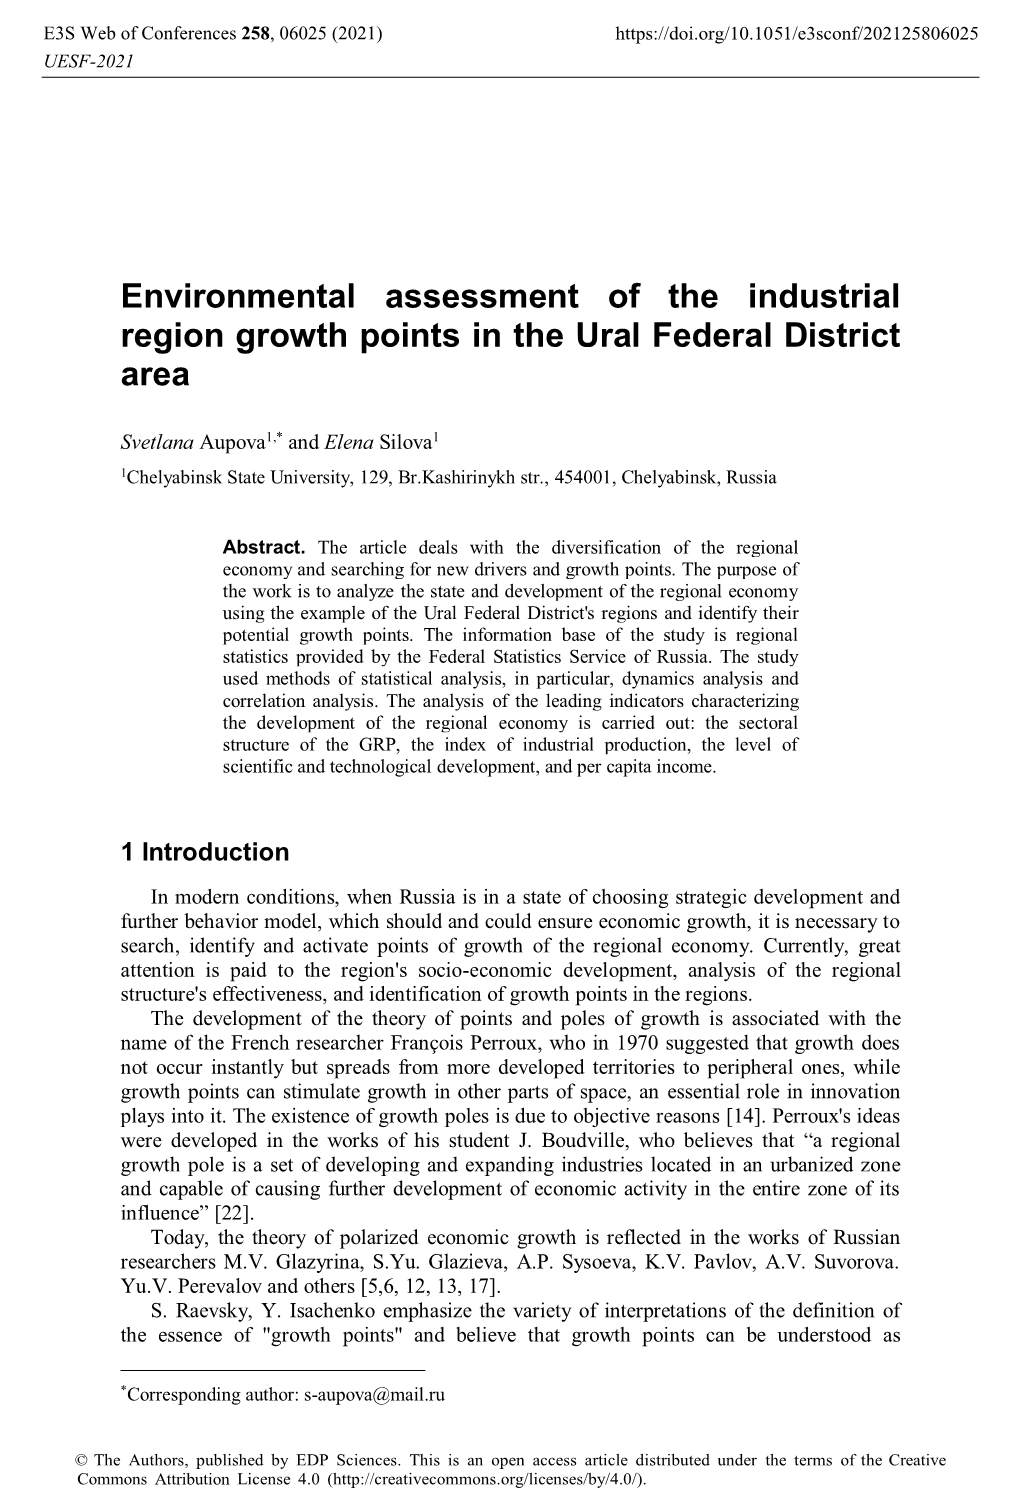 Environmental Assessment of the Industrial Region Growth Points in the Ural Federal District Area